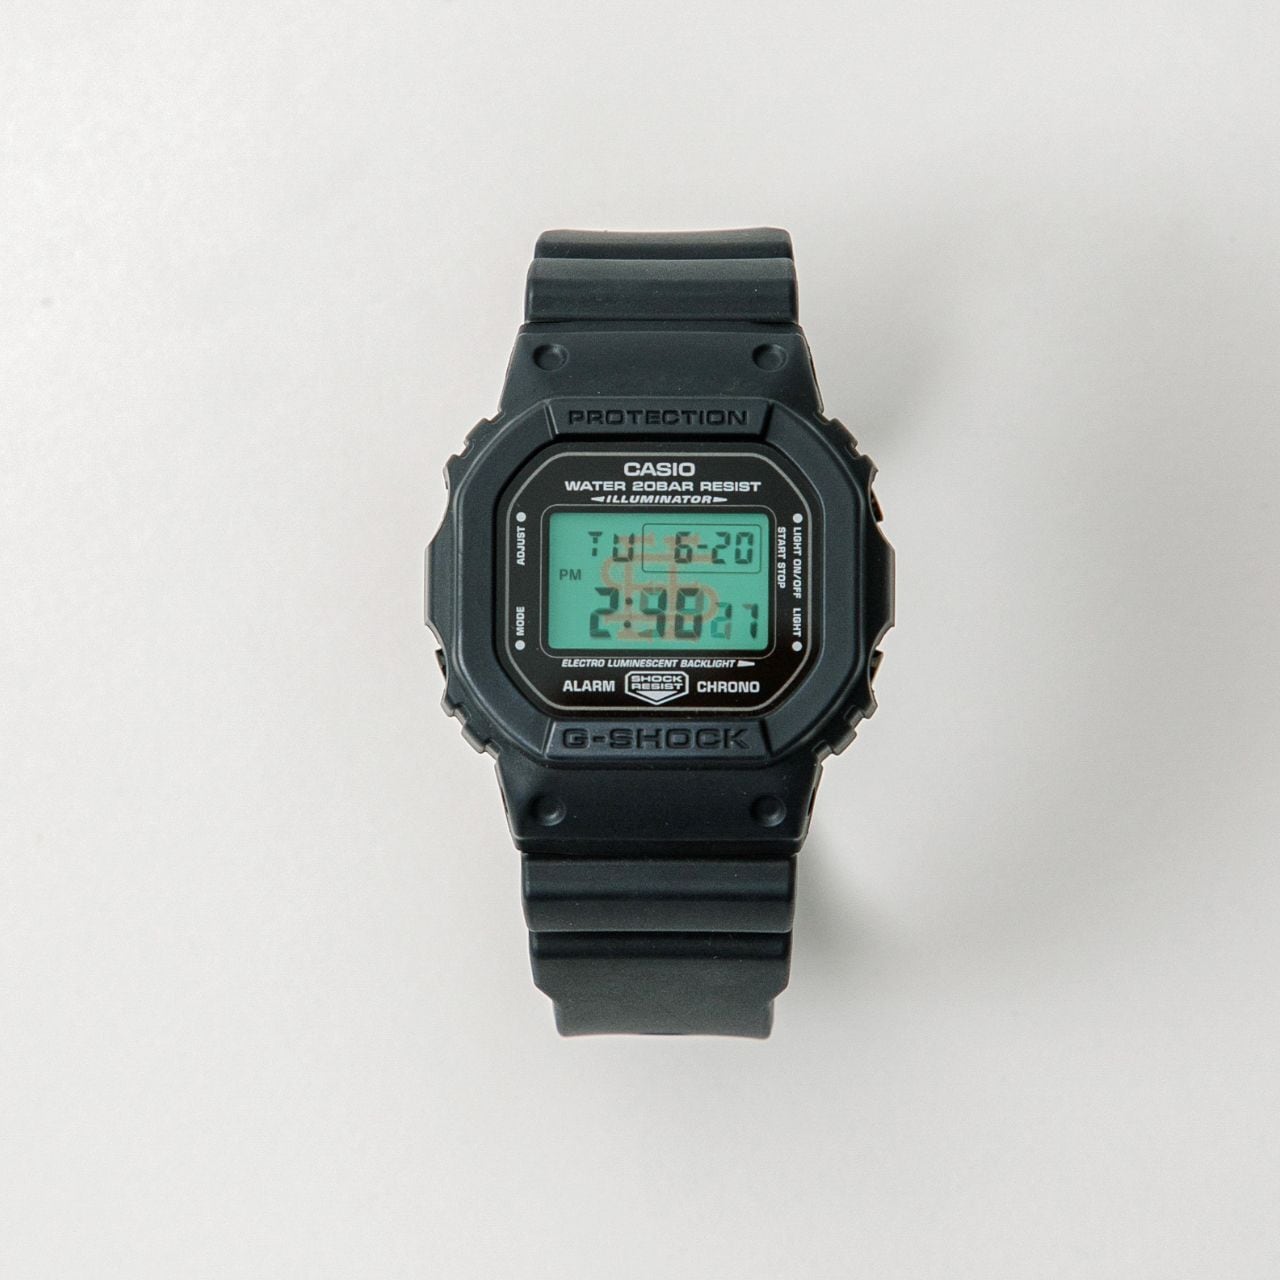 SEE SEEﾃ宥-Shock DW5600 Yes Good Market ONLINE